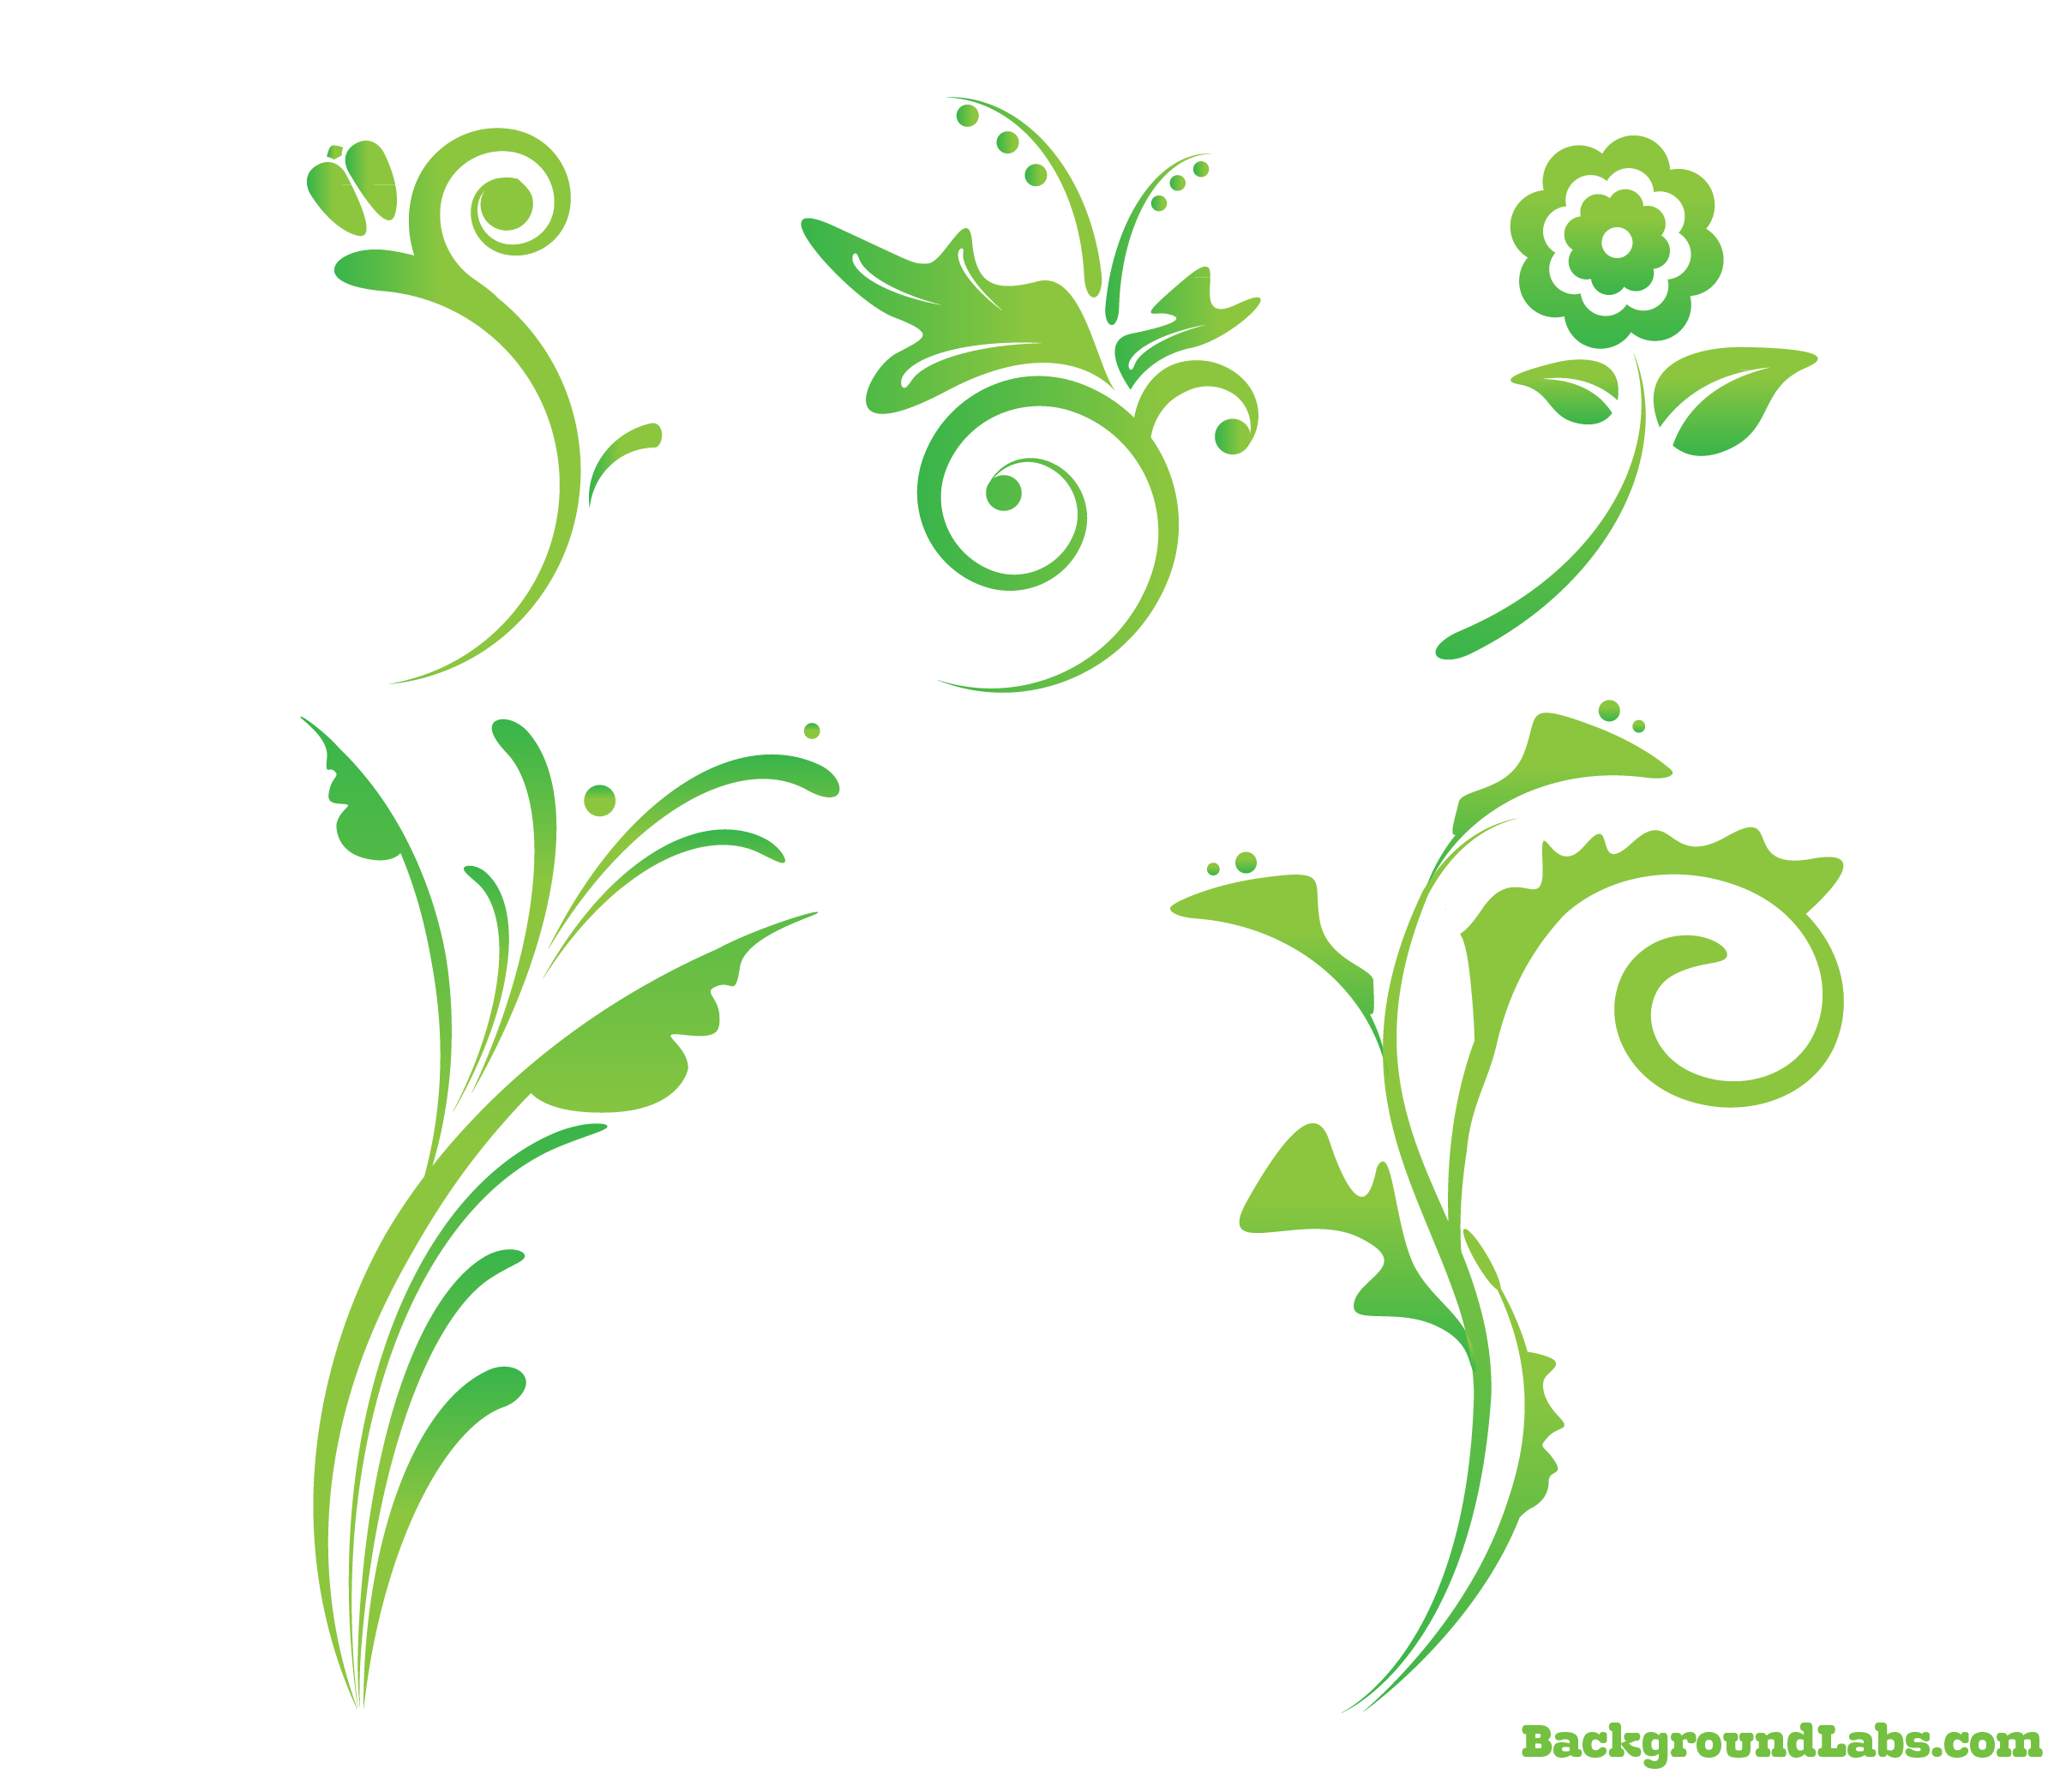 free vector flower clipart - photo #18